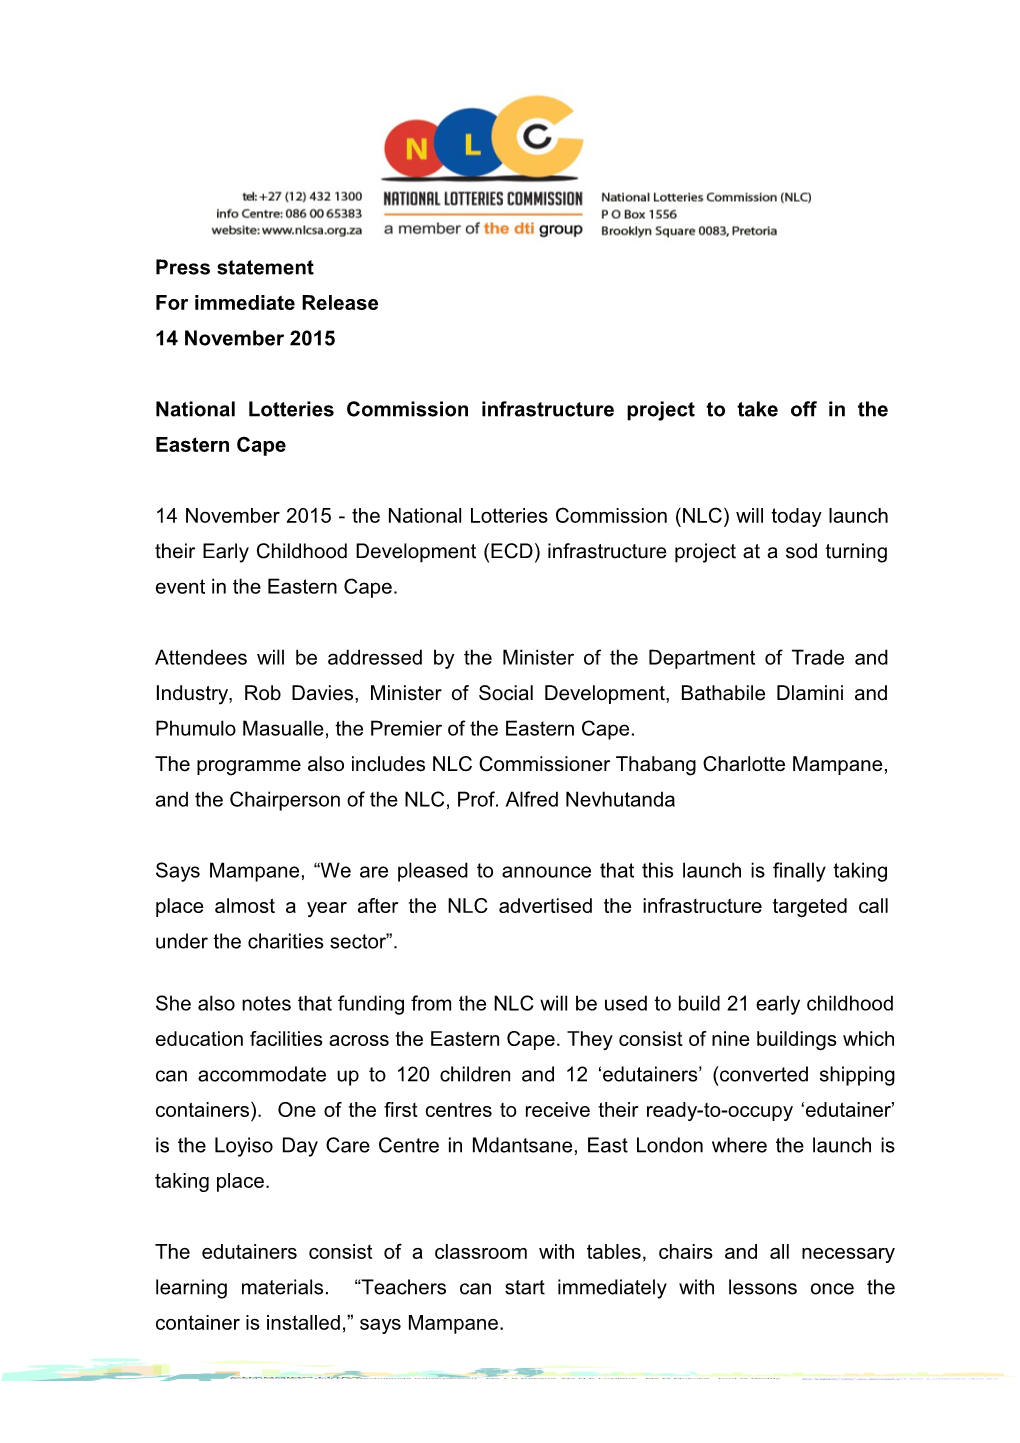 National Lotteries Commission Infrastructure Project to Take Off in the Eastern Cape